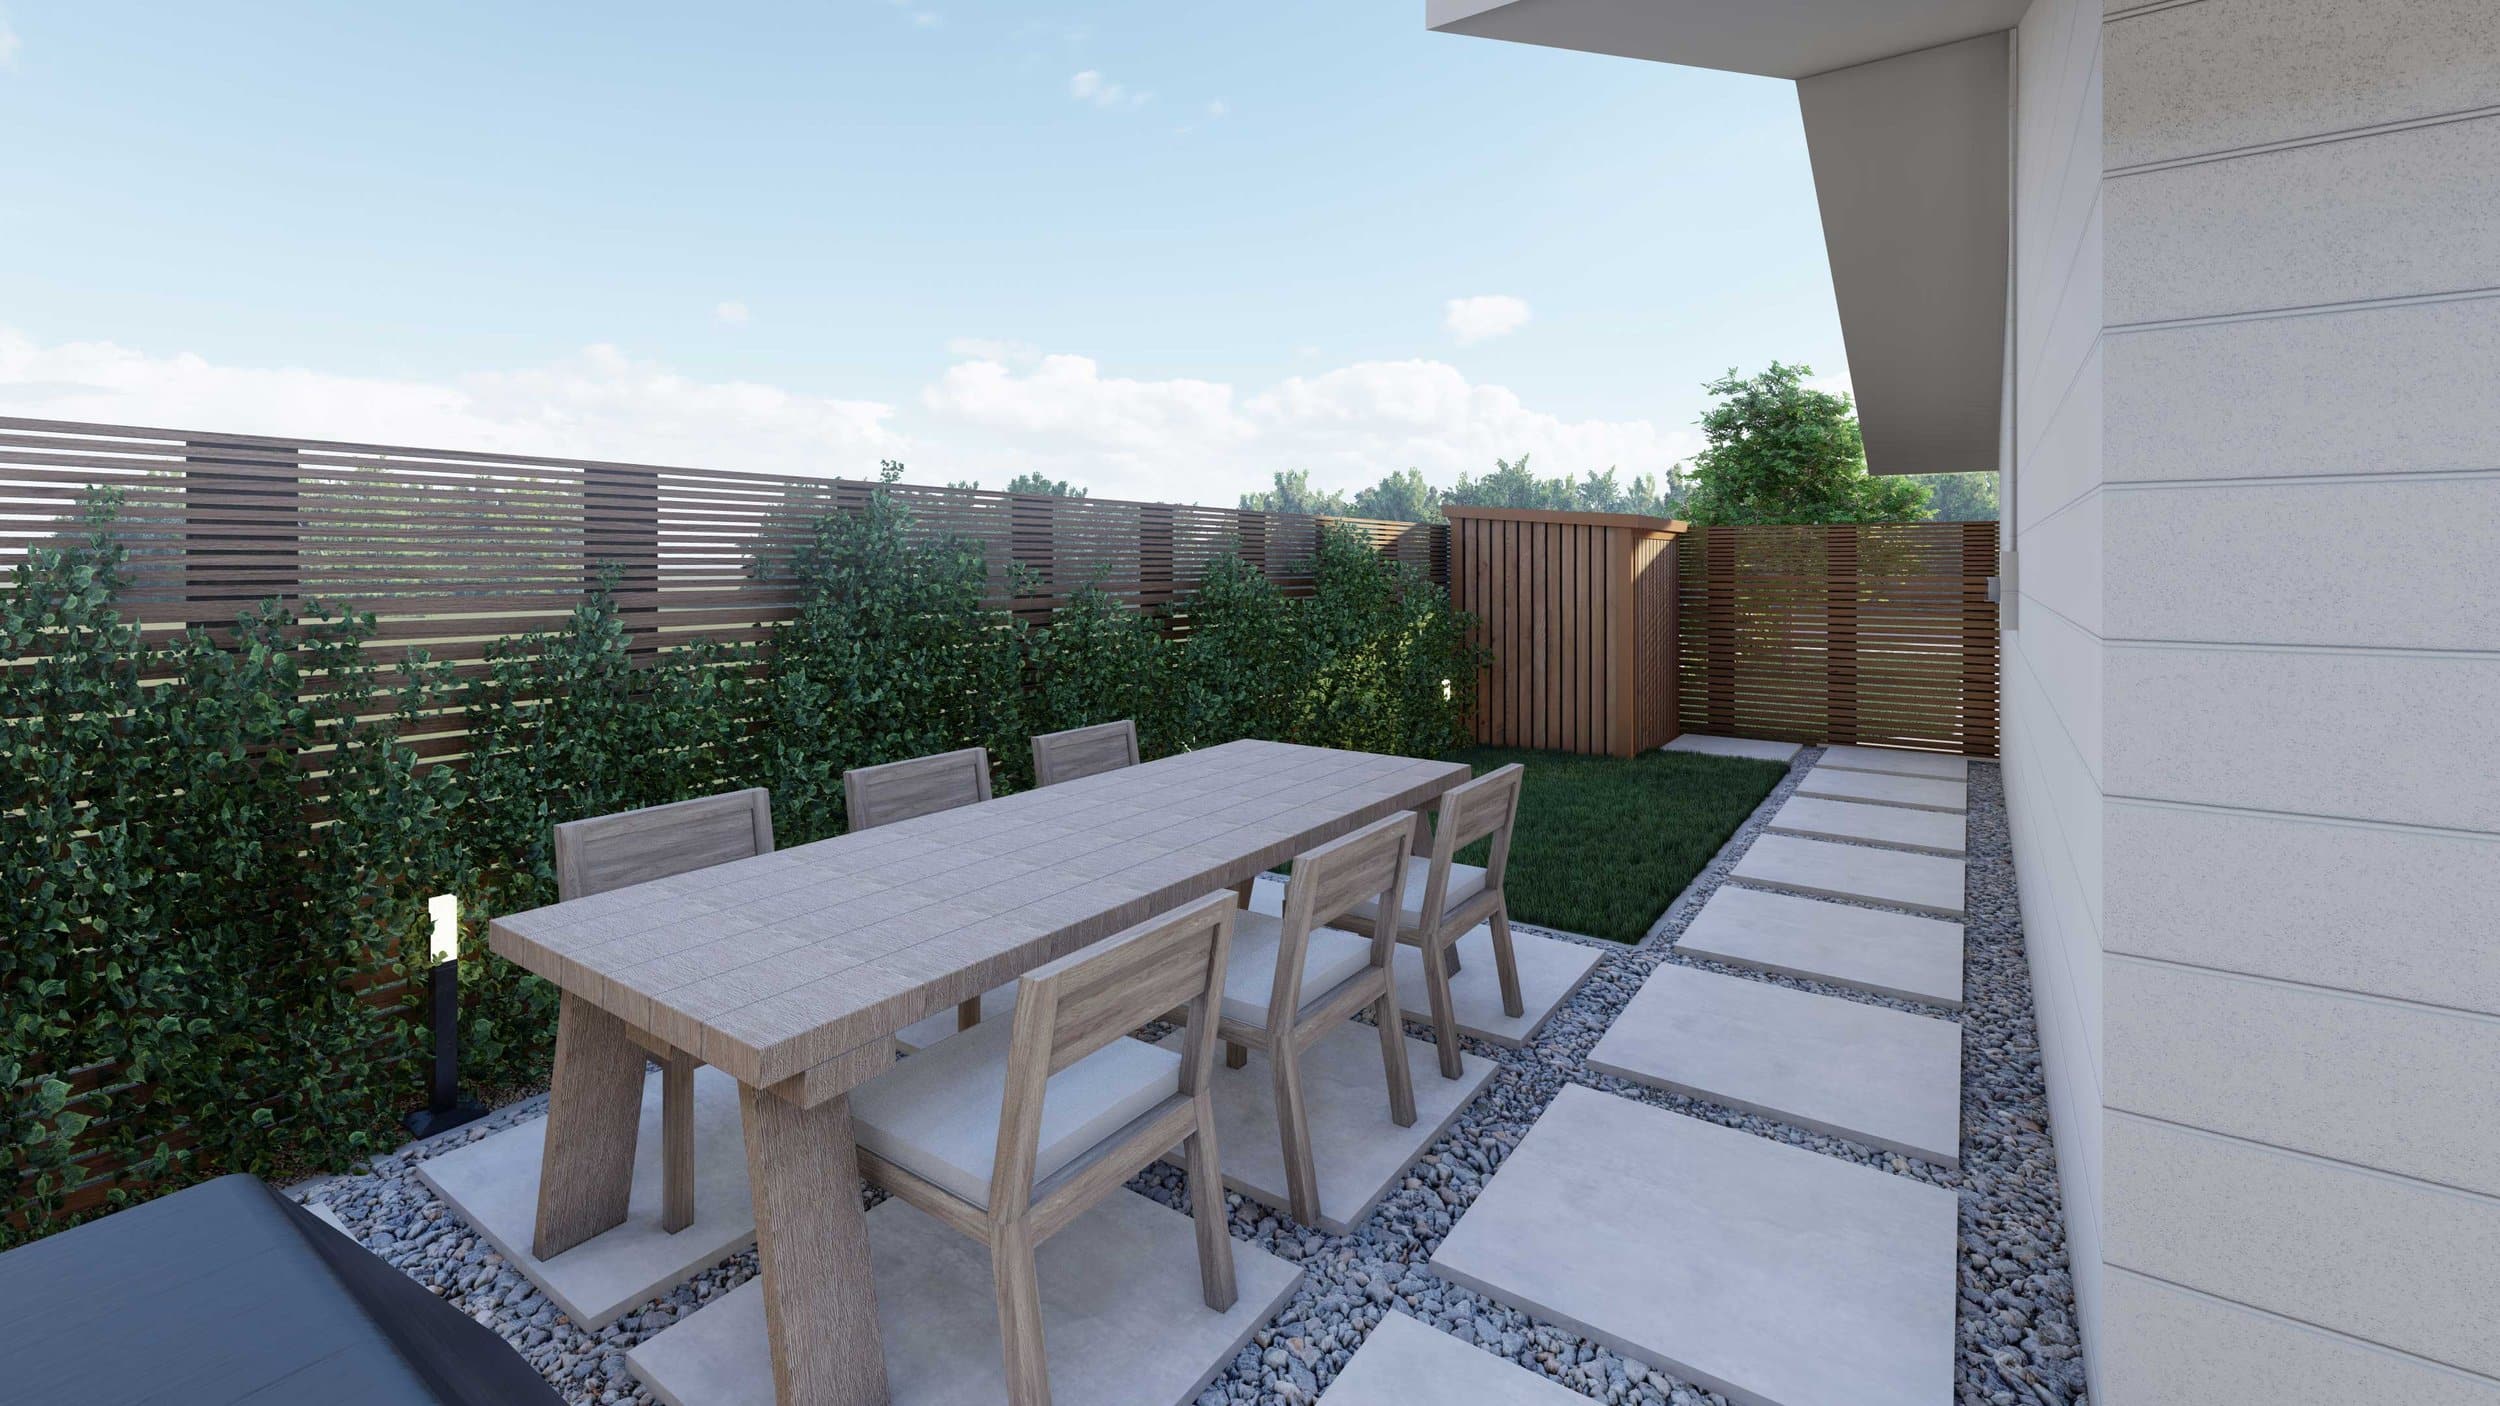 small backyard with planters alongside fence and outdoor dining set on concrete paver and gravel patio